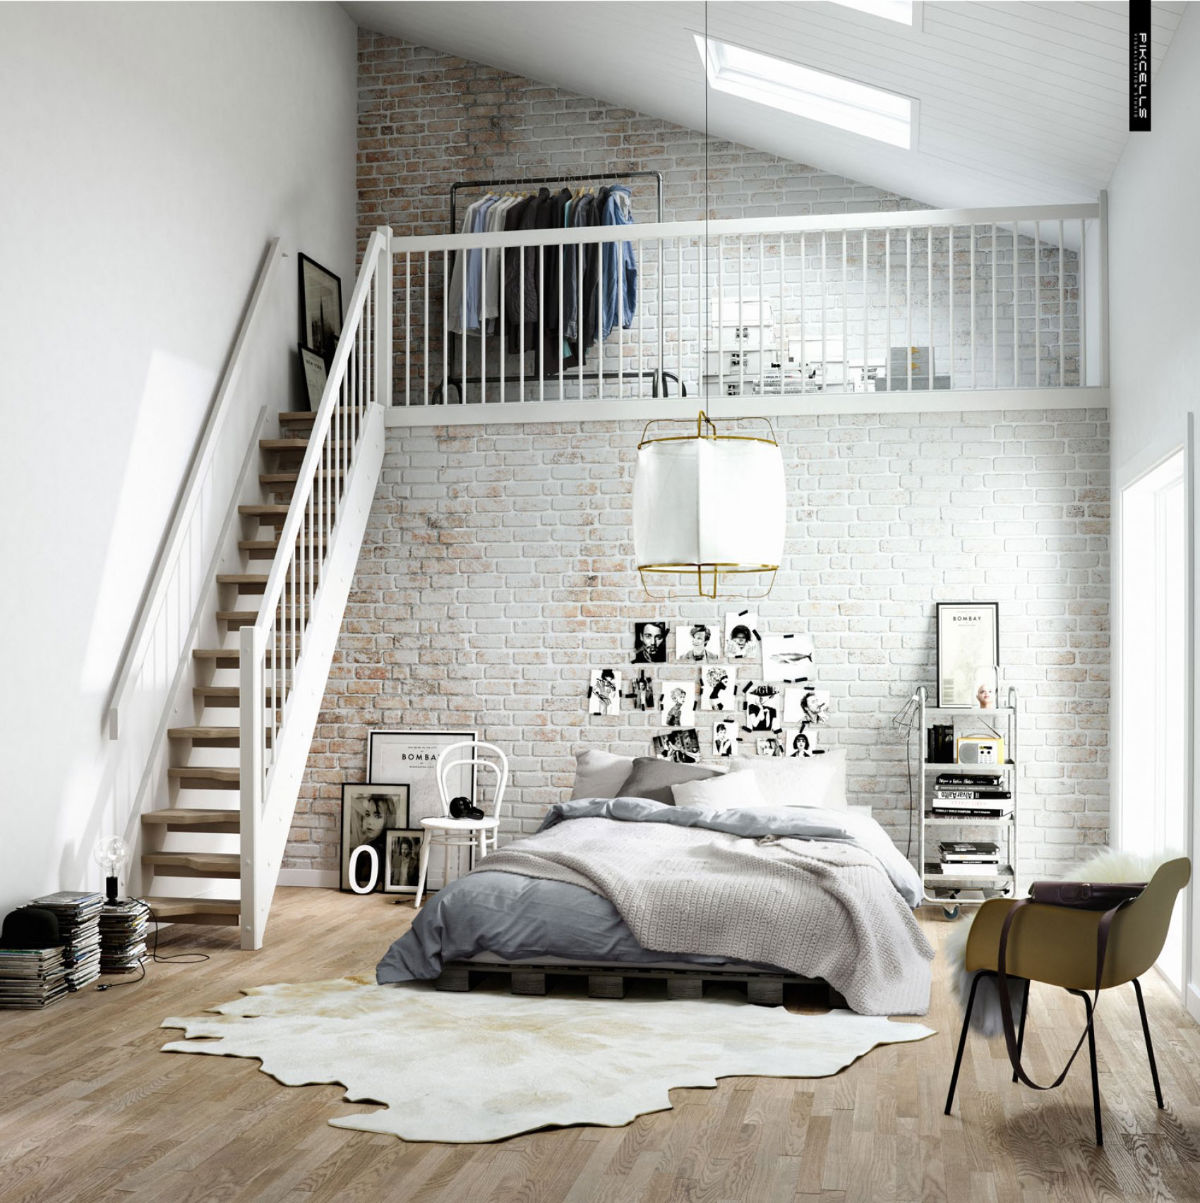 white modern brick bedroom "width =" 1200 "height =" 1203 "srcset =" https://mileray.com/wp-content/uploads/2020/05/1588508056_808_3-Sophisticated-Bedroom-Designs-Applying-With-a-Brick-Accent-Decor.jpg 1200w, https://mileray.com/wp - content / uploads / 2017/01 / Pikcells-150x150.jpg 150w, https://mileray.com/wp-content/uploads/2017/01/Pikcells-300x300.jpg 300w, https://mileray.com/wp - content / uploads / 2017/01 / Pikcells-768x770.jpg 768w, https://mileray.com/wp-content/uploads/2017/01/Pikcells-1021x1024.jpg 1021w, https://mileray.com/wp - content / uploads / 2017/01 / Pikcells-696x698.jpg 696w, https://mileray.com/wp-content/uploads/2017/01/Pikcells-1068x1071.jpg 1068w, https://mileray.com/wp - content / uploads / 2017/01 / Pikcells-419x420.jpg 419w "sizes =" (maximum width: 1200px) 100vw, 1200px